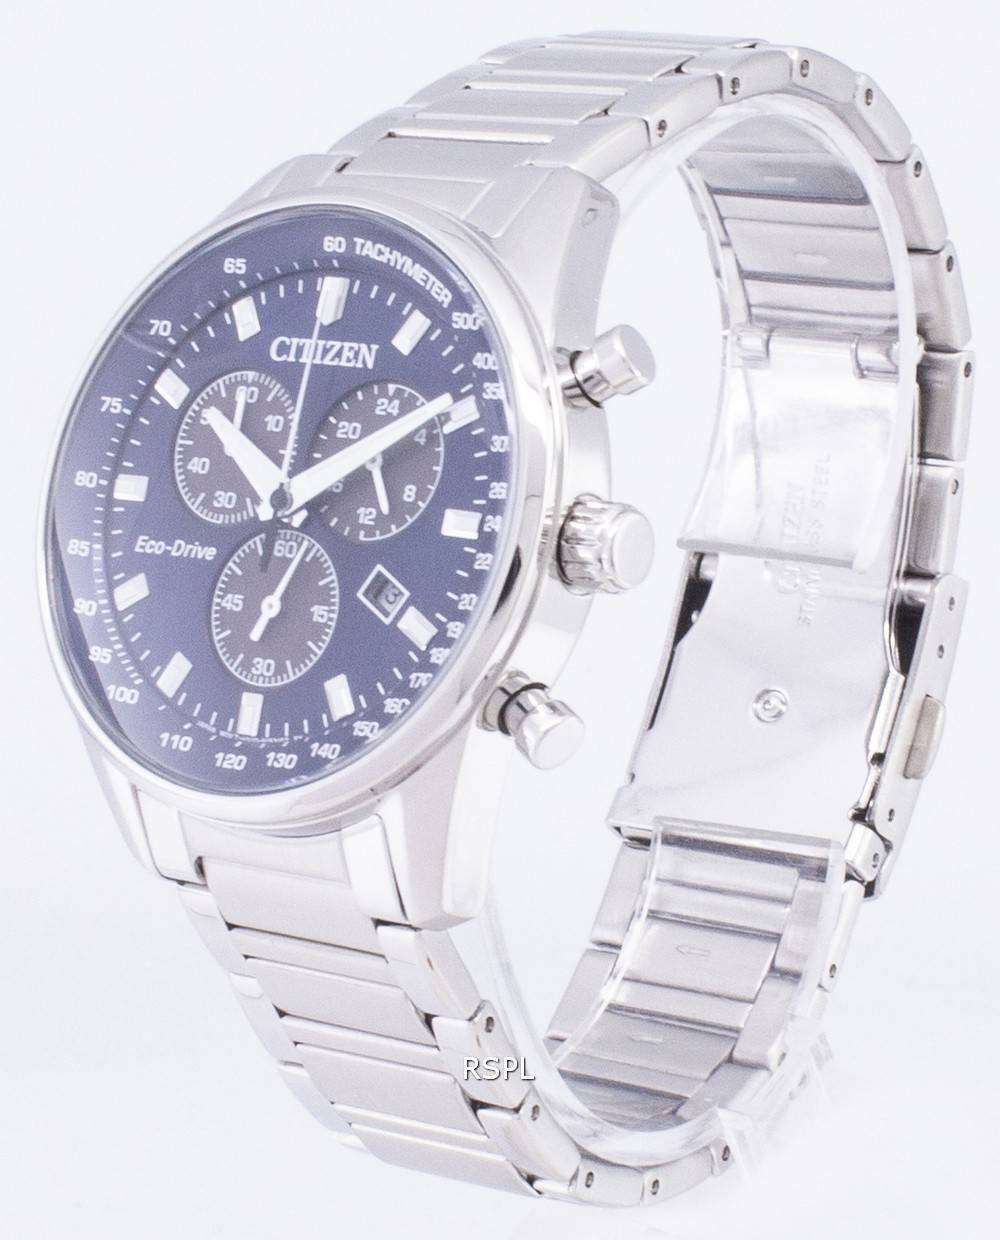 Citizen Eco-Drive AT2390-82L Chronograph Men's Watch - CityWatches.co.uk